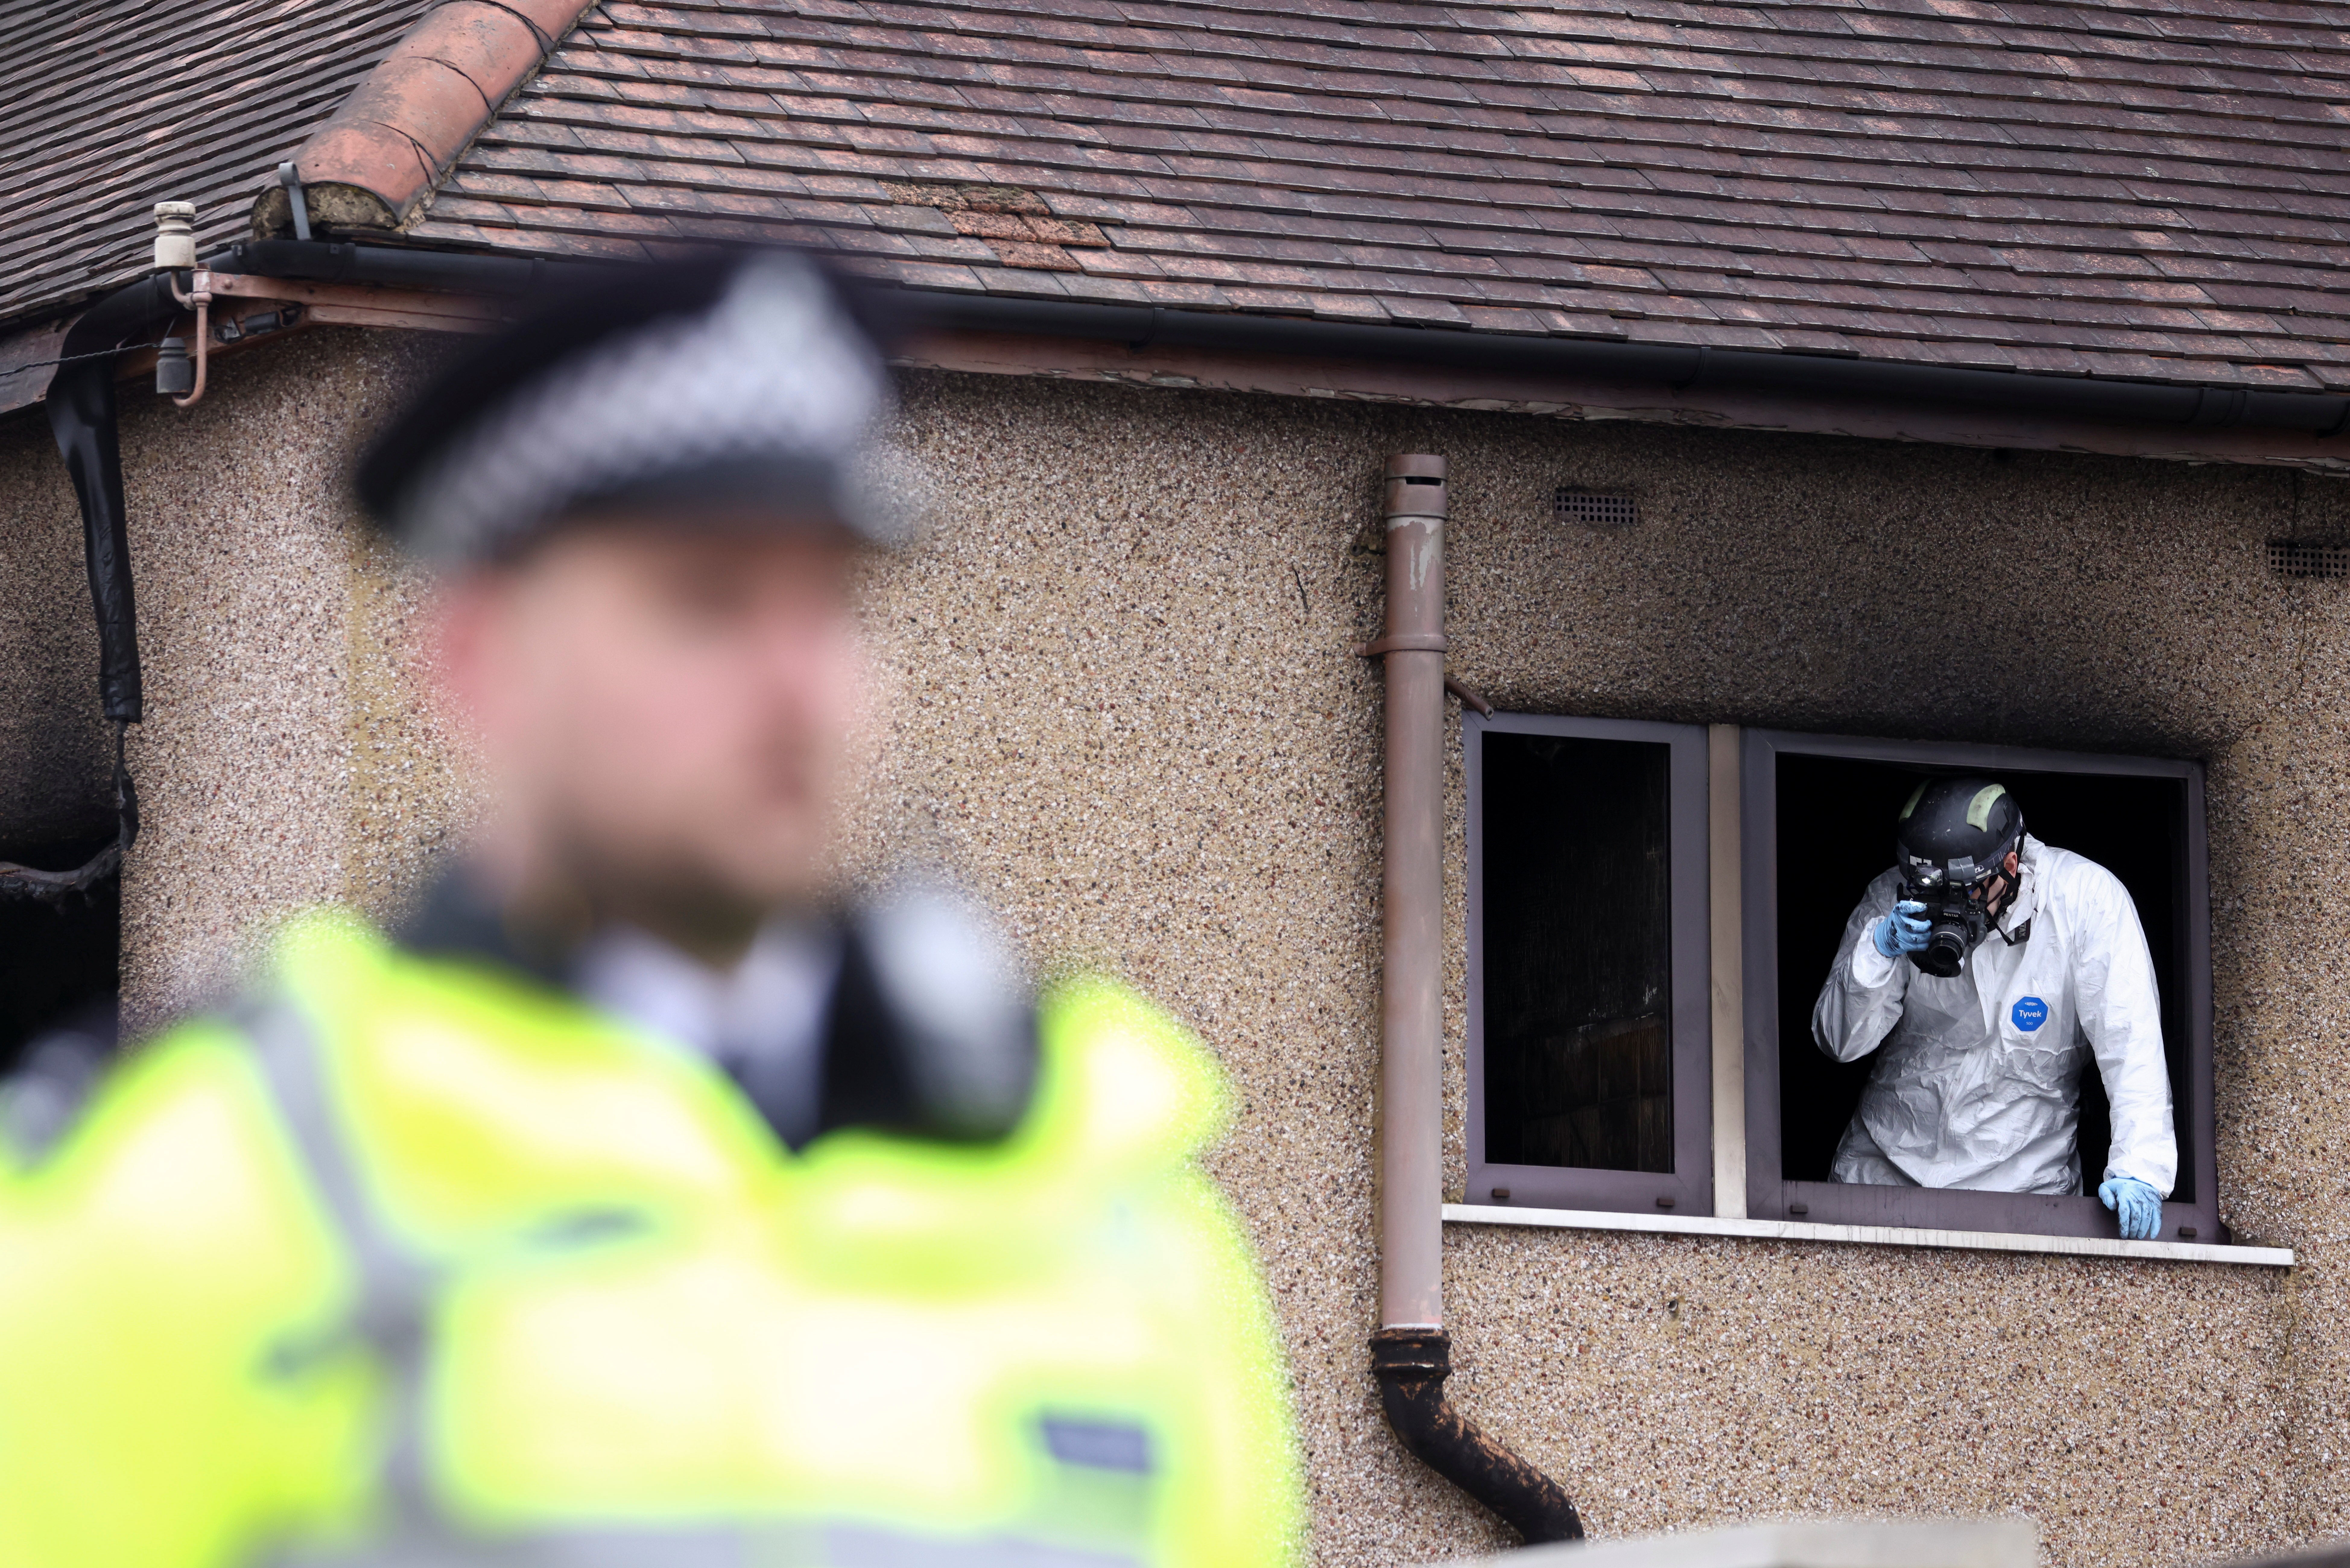 An investigator inspects the scene of a house fire in Bexleyheath